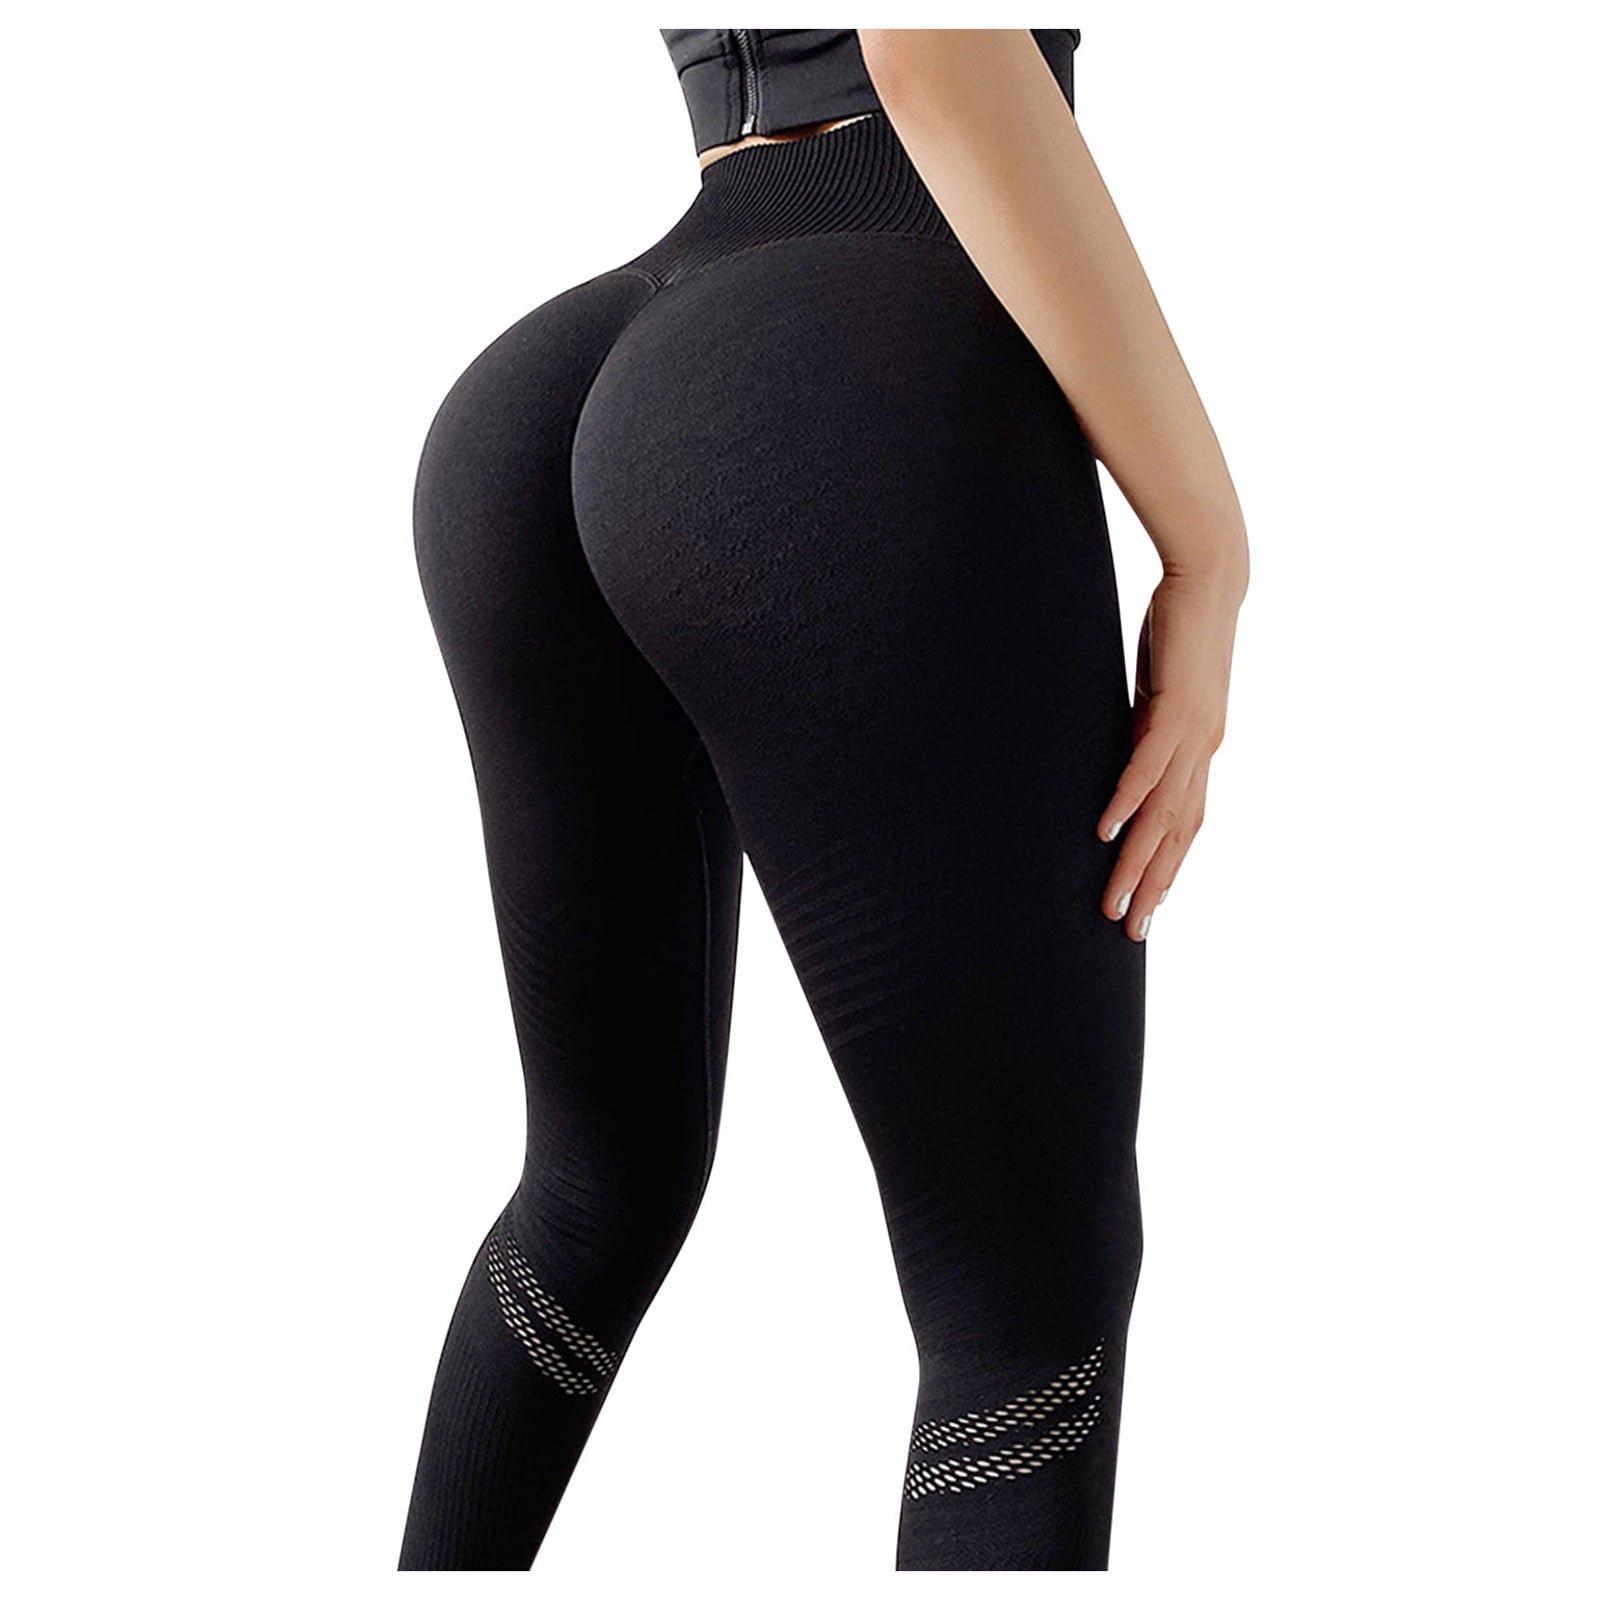 YOYOYOGA Yoga Leggings for Women Carbon Finishing High Waisted Yoga Pants  with Pockets Workout Running Legging - Coupon Codes, Promo Codes, Daily  Deals, Save Money Today